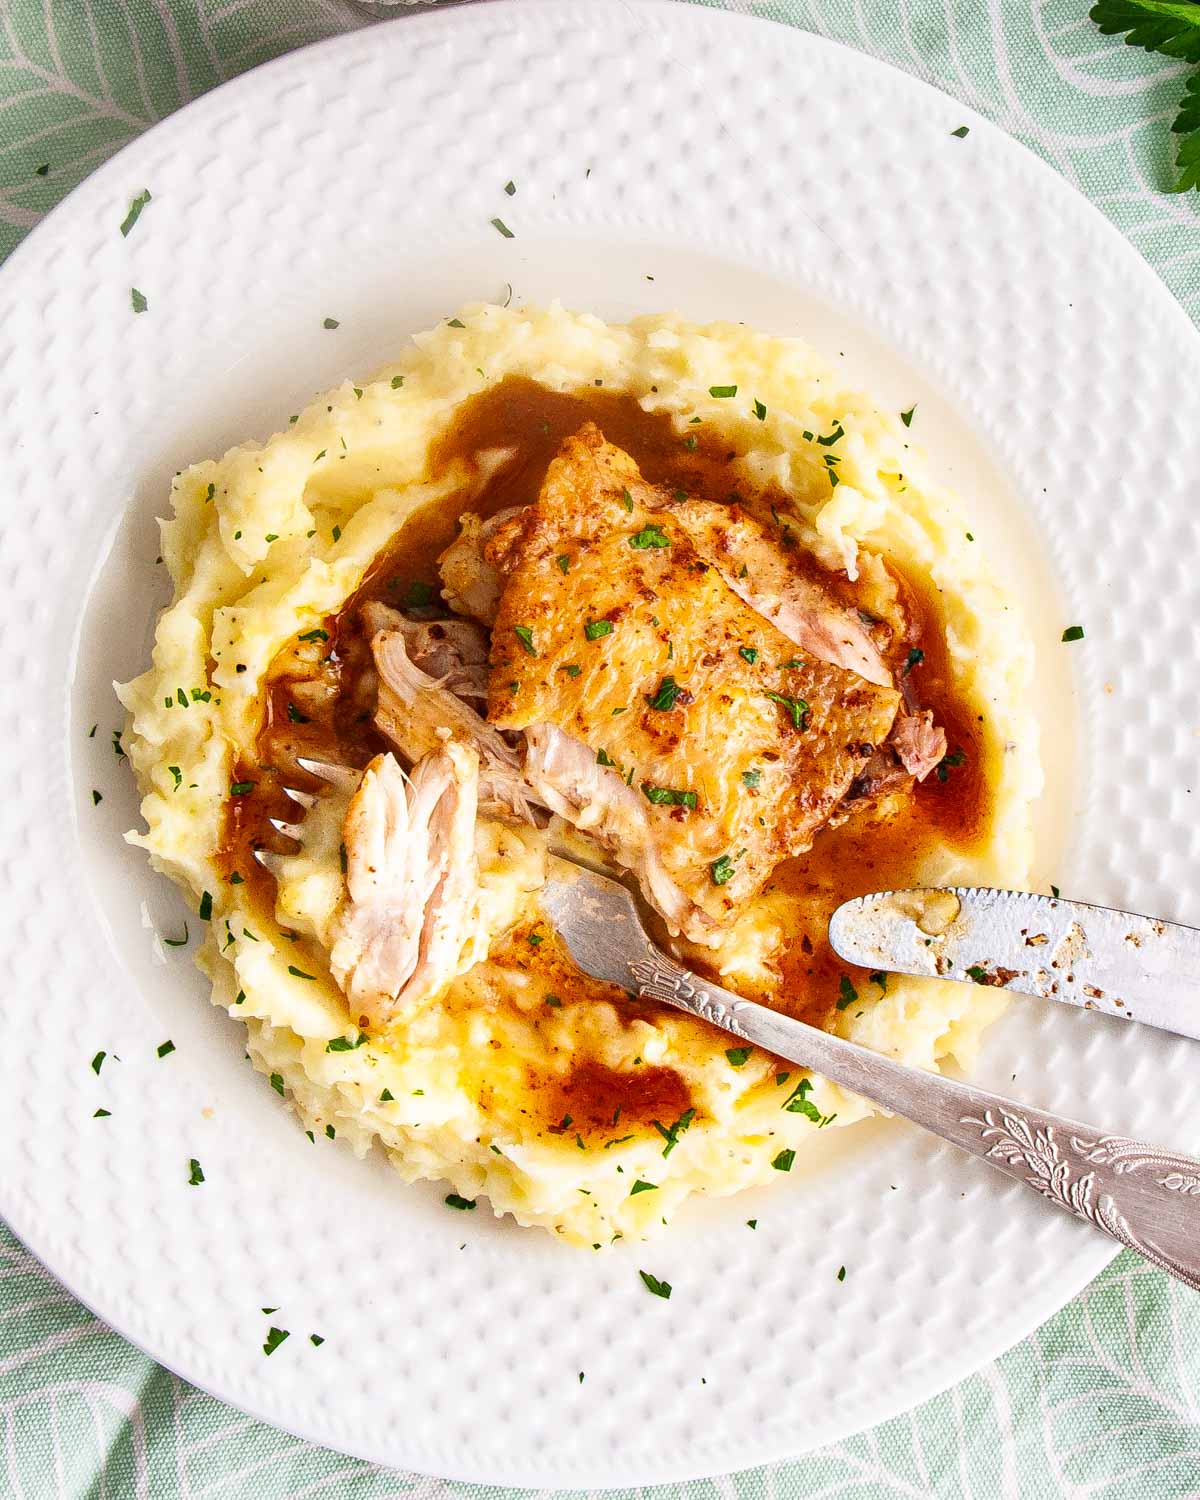 chicken thigh with gravy on a bed of mashed potatoes.